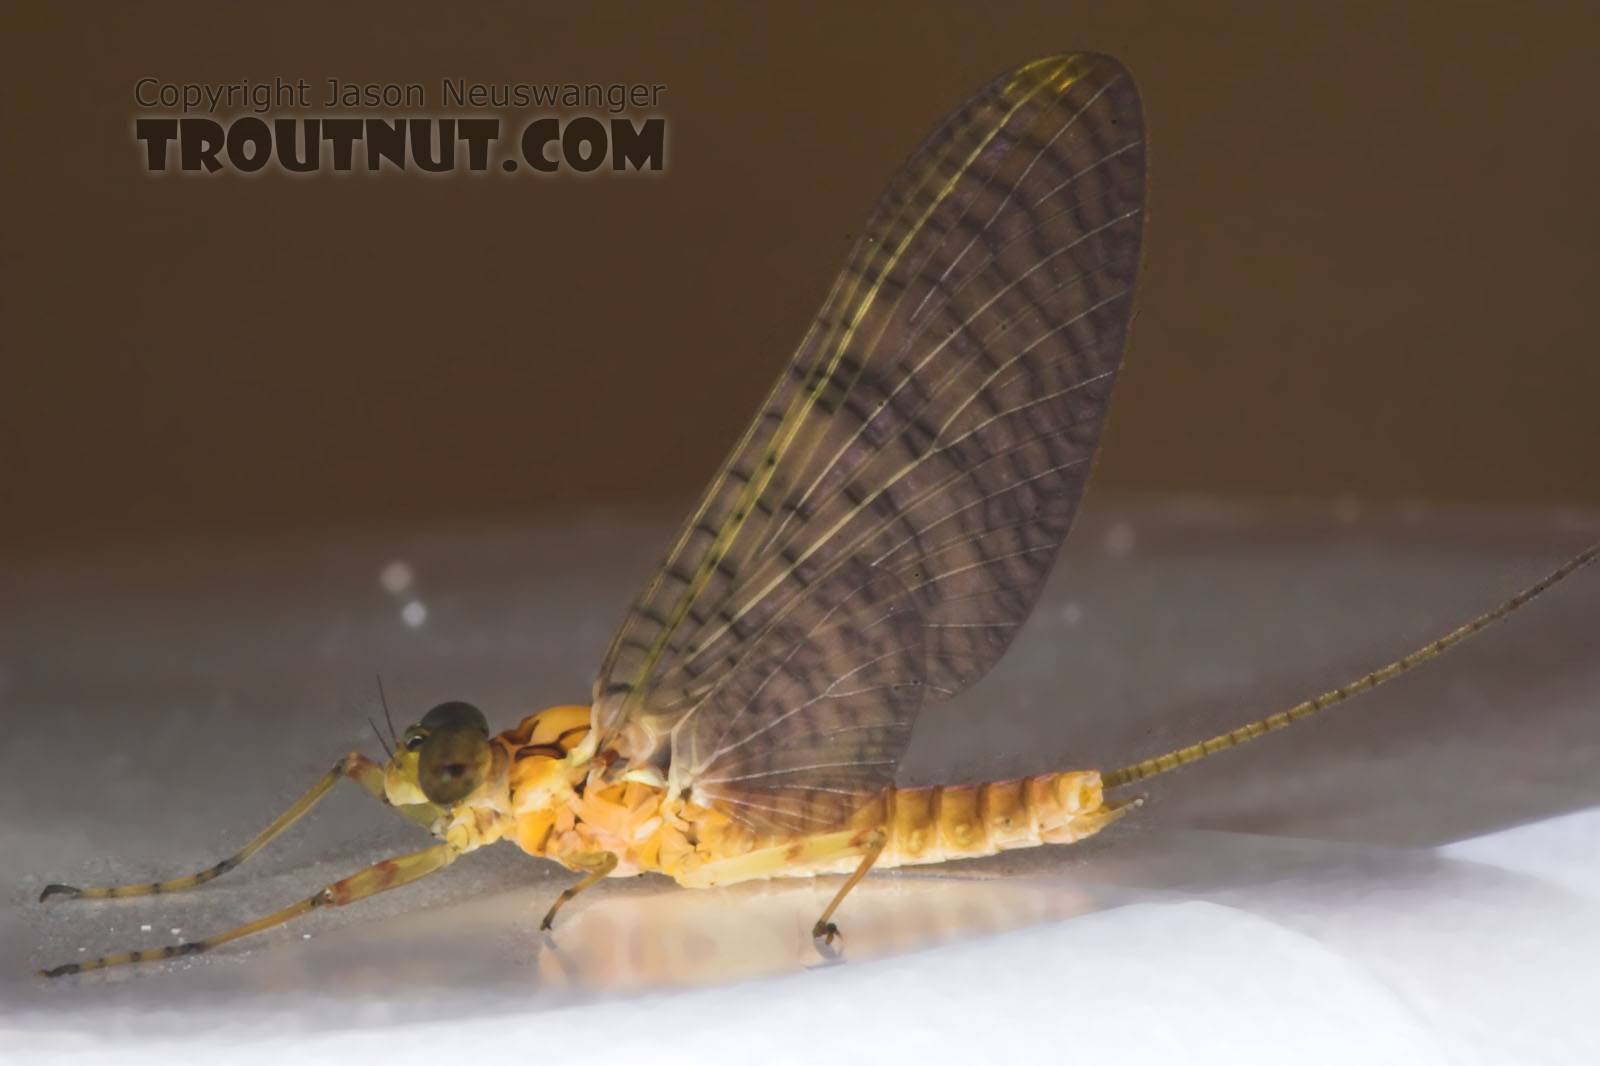 Male Maccaffertium (March Browns and Cahills) Mayfly Dun from the Namekagon River in Wisconsin